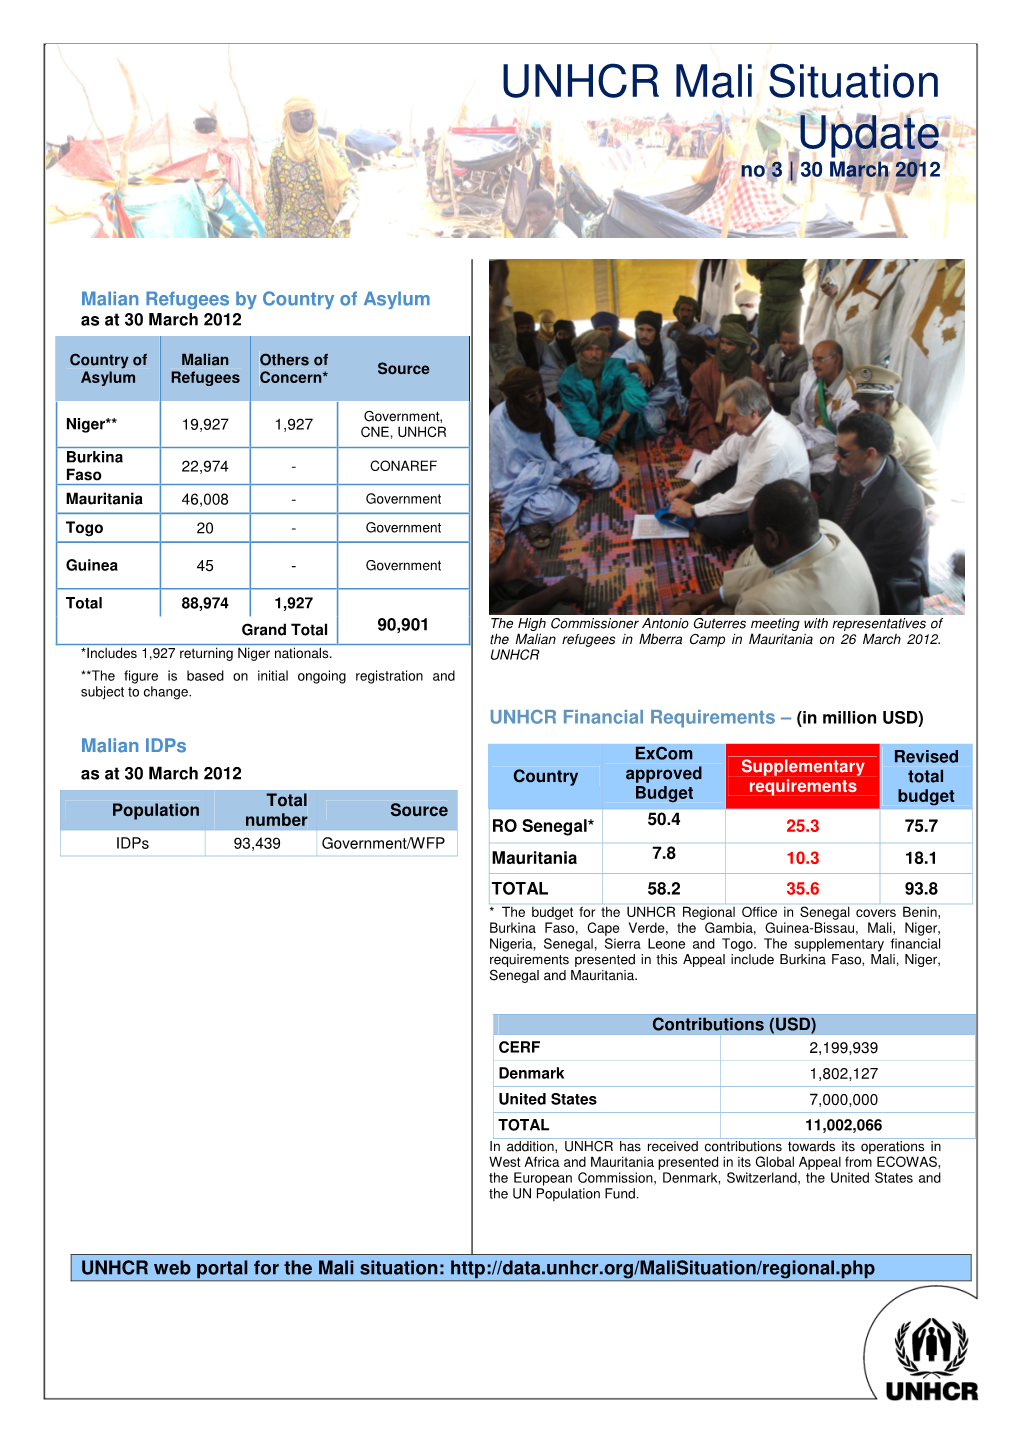 UNHCR Mali Situation Update No 3 | 30 March 2012